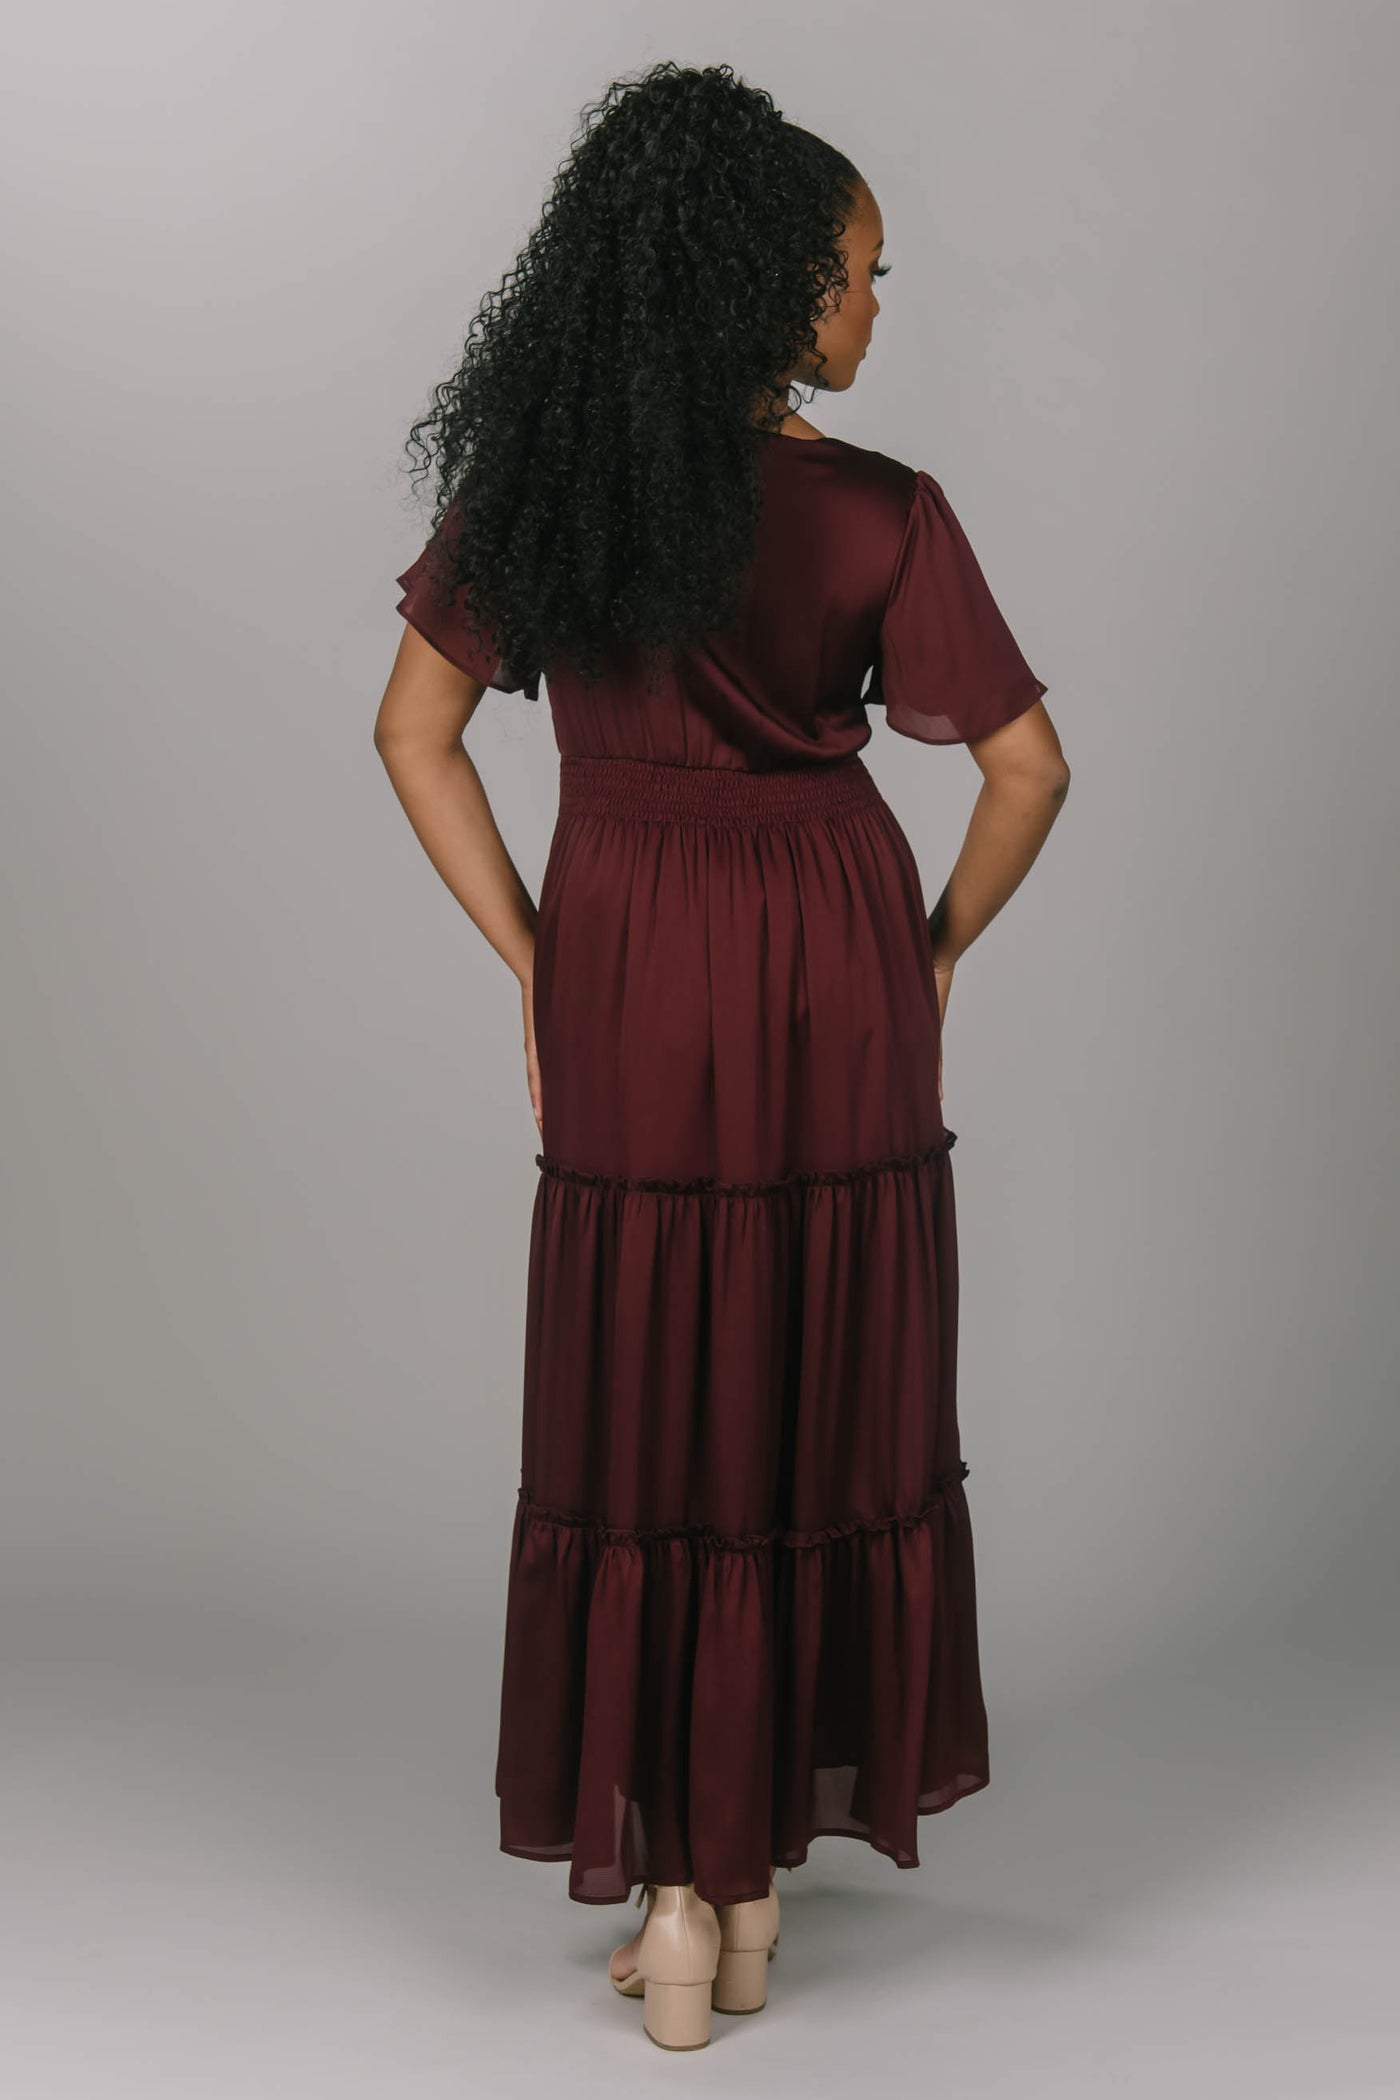 Modest bridesmaid dress with v neckline and flutter sleeves. This dress is a zinfandel color with a tiered skirt. This makes for the perfect modest bridesmaid dress for any season.